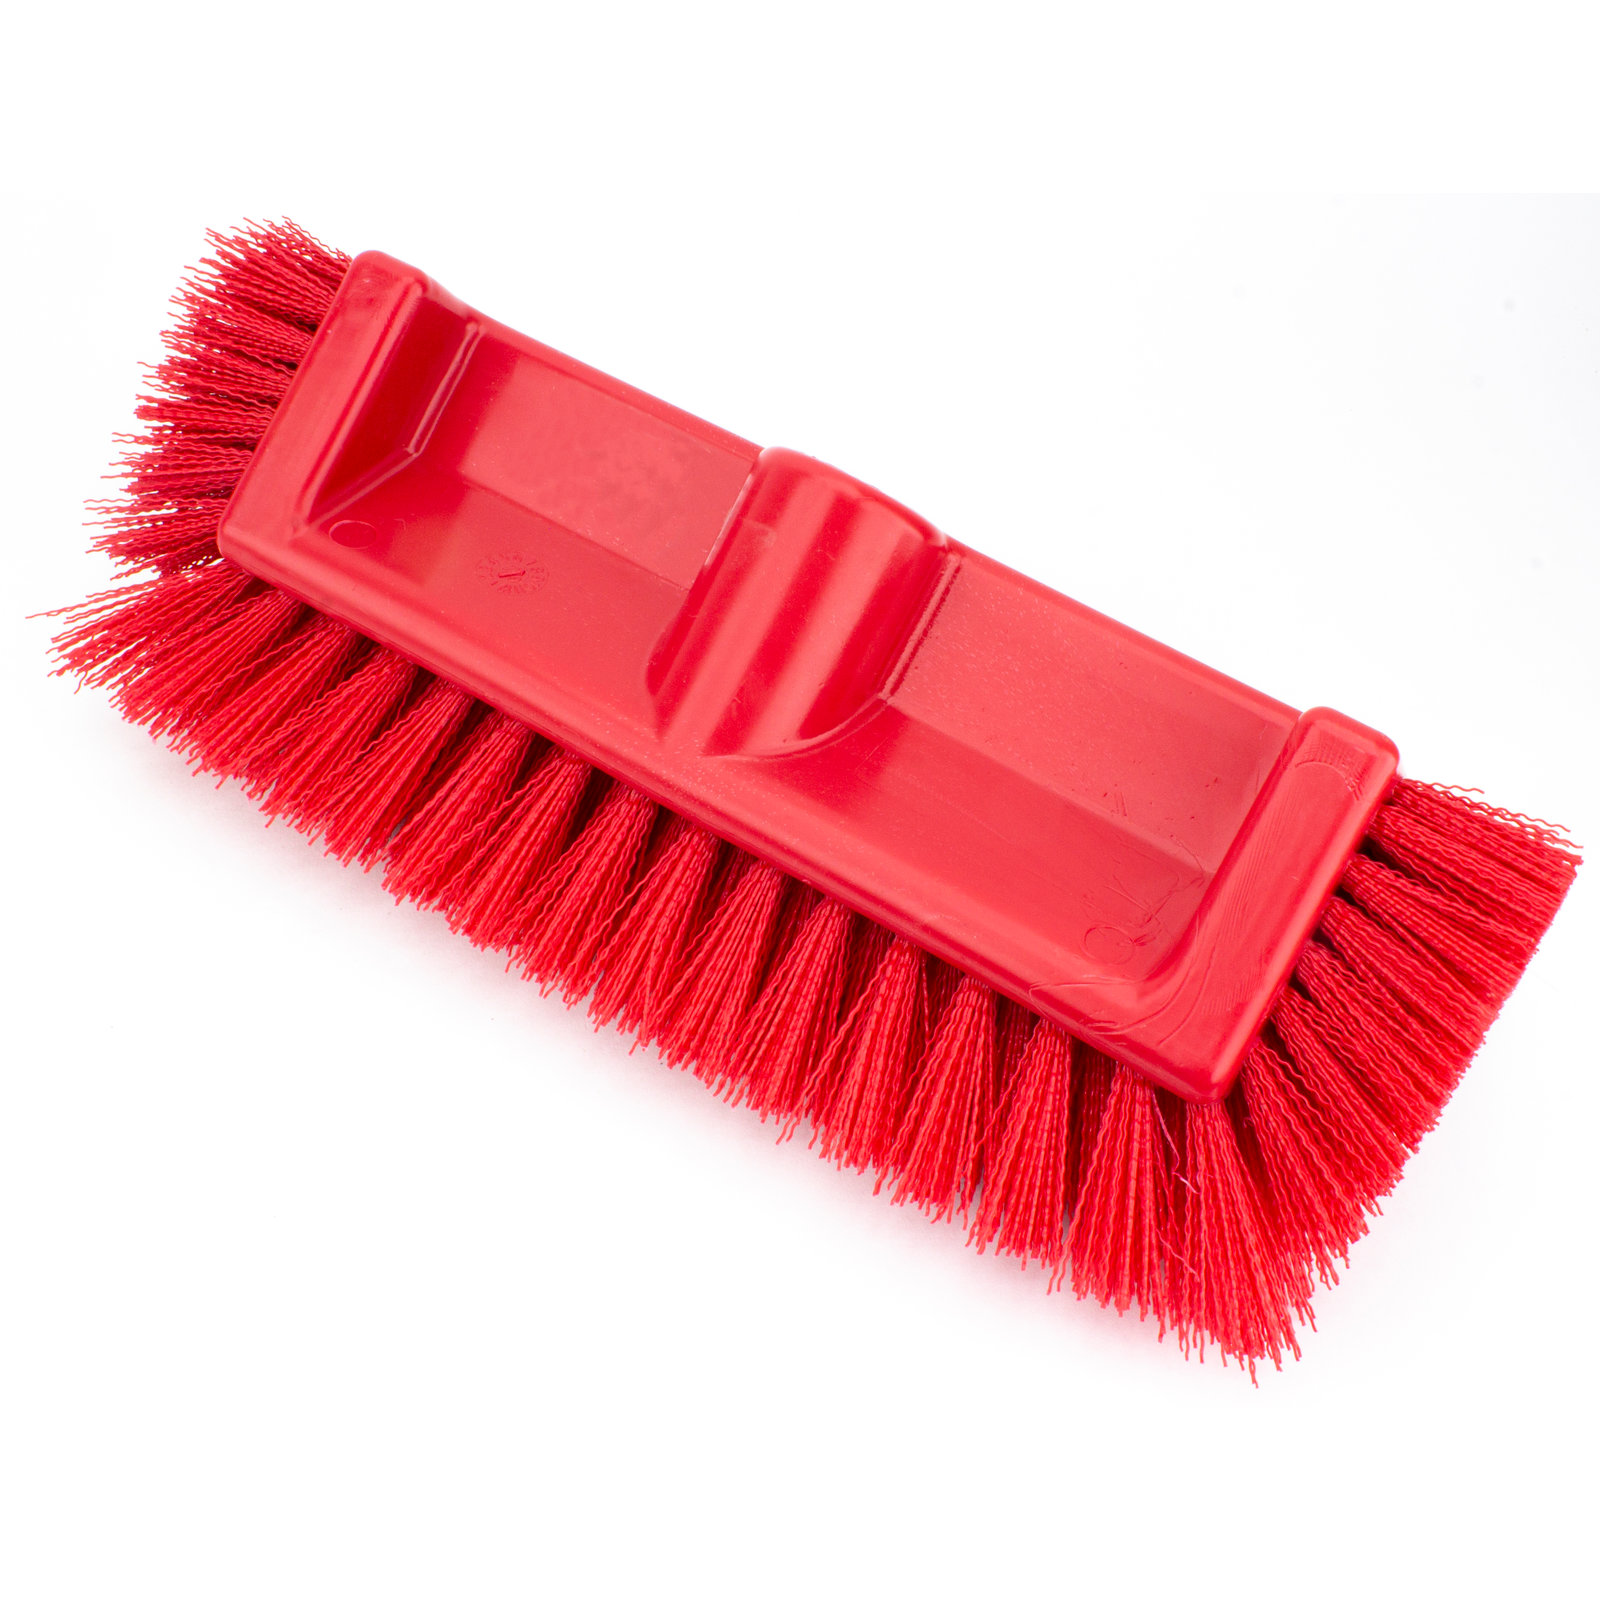 Carlisle 3611VRD Value Rotary General Cleaning Scrub Brush for High Gloss  Floors - Red - 11